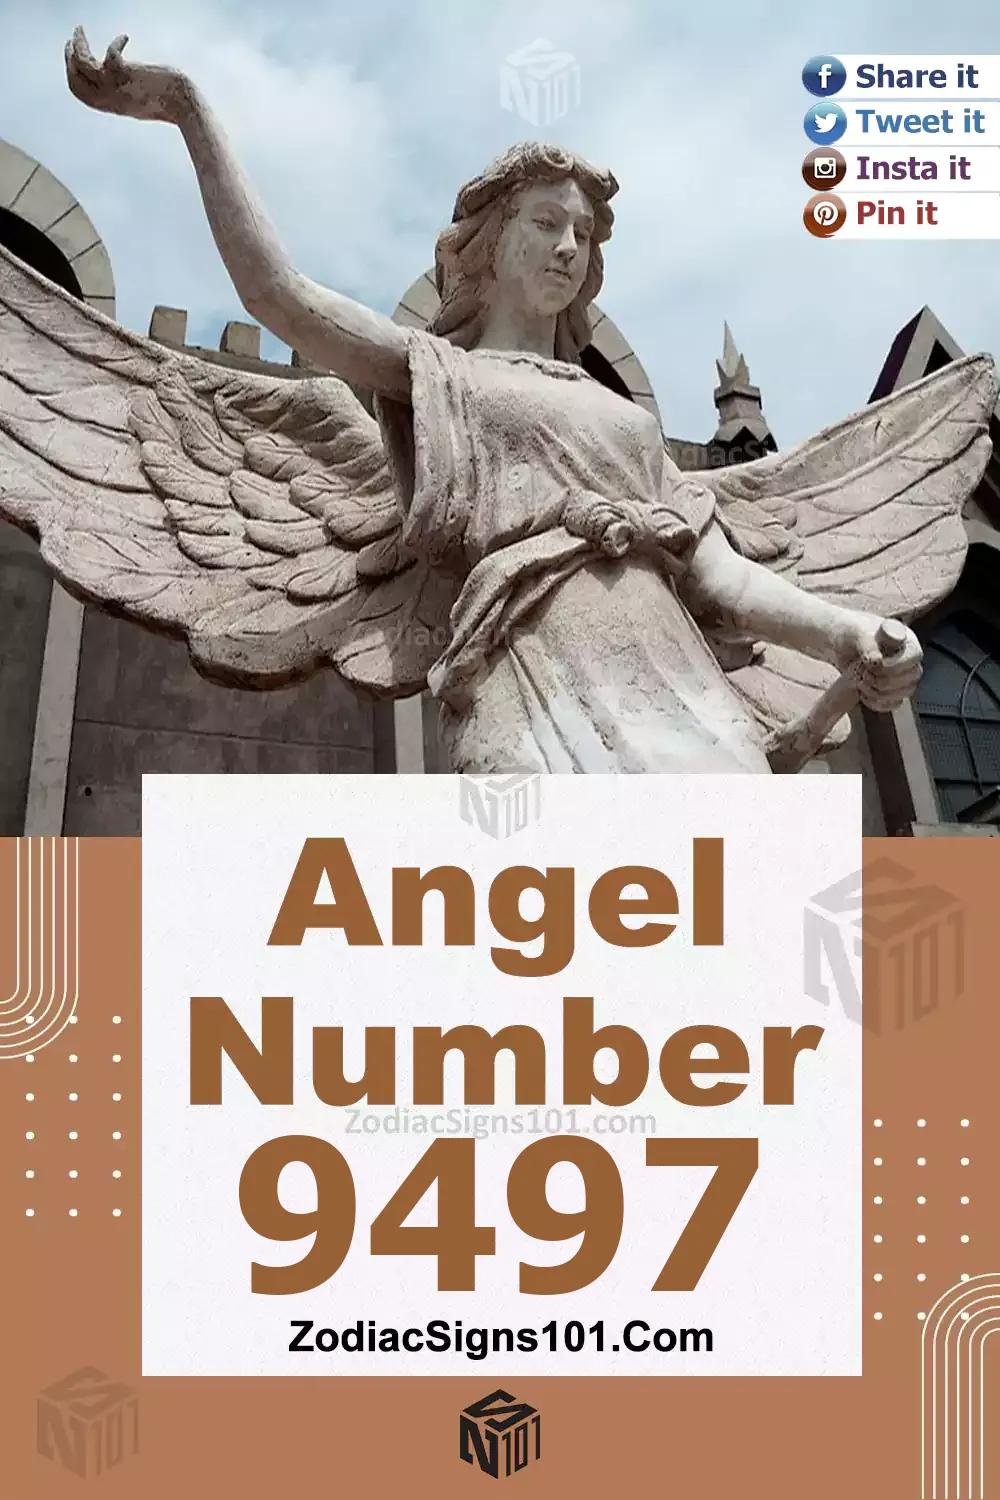 9497 Angel Number Meaning